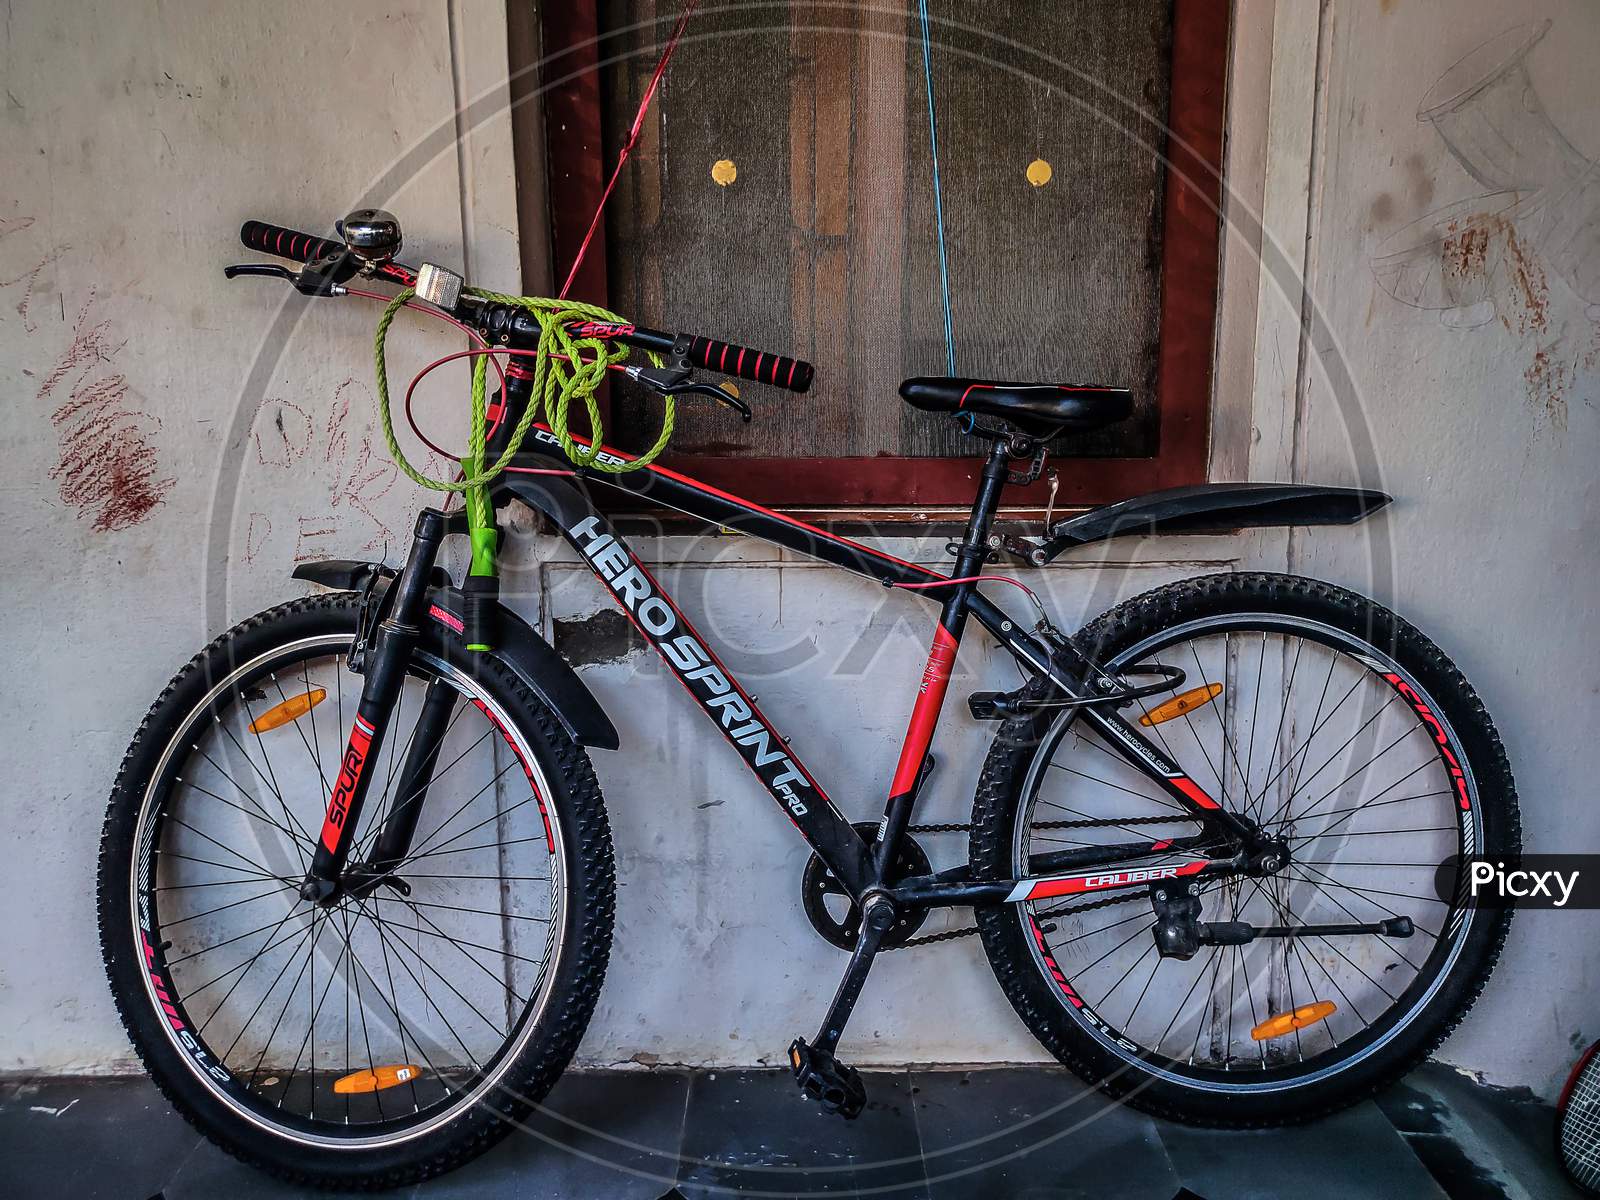 Gulbrga, Karnataka, India- February 15Th 2021; Stock Photo Of Brand New Black Color Hero Print Pro Caliber Men Bicycle Parked At Home In Afternoon At Gulbrga Karnataka India.